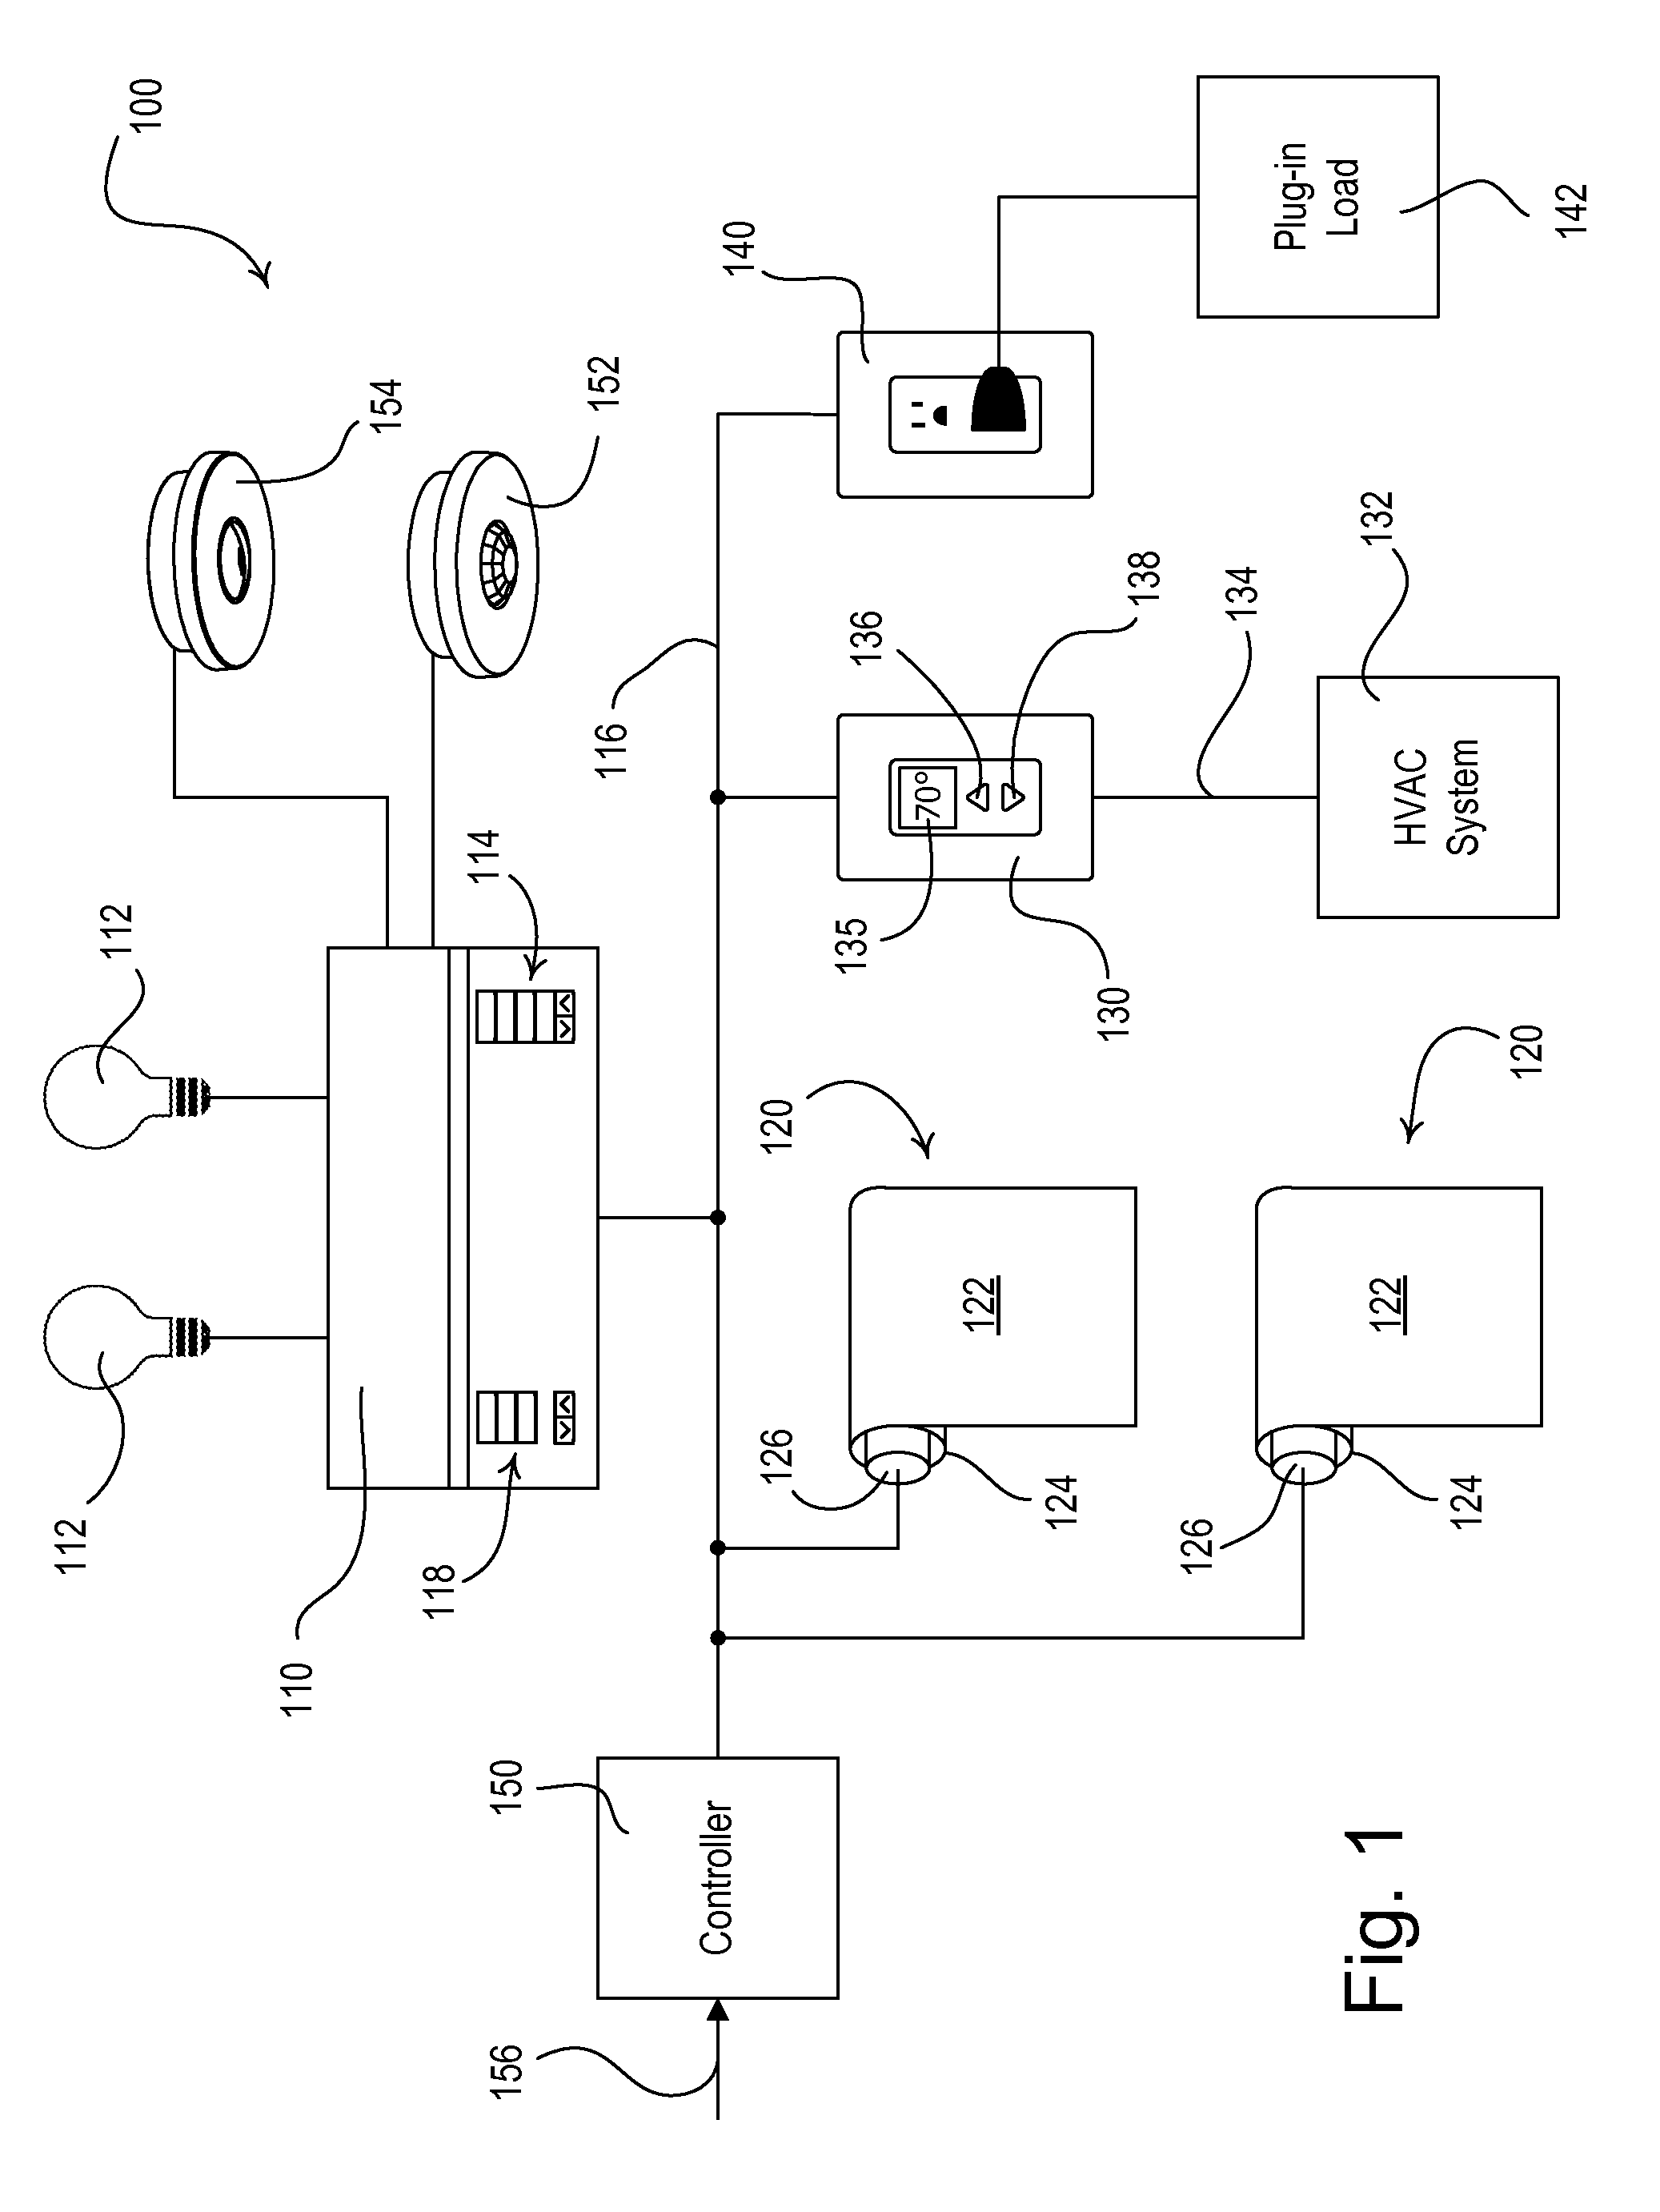 Dynamic Keypad for Controlling Energy-Savings Modes of a Load Control System